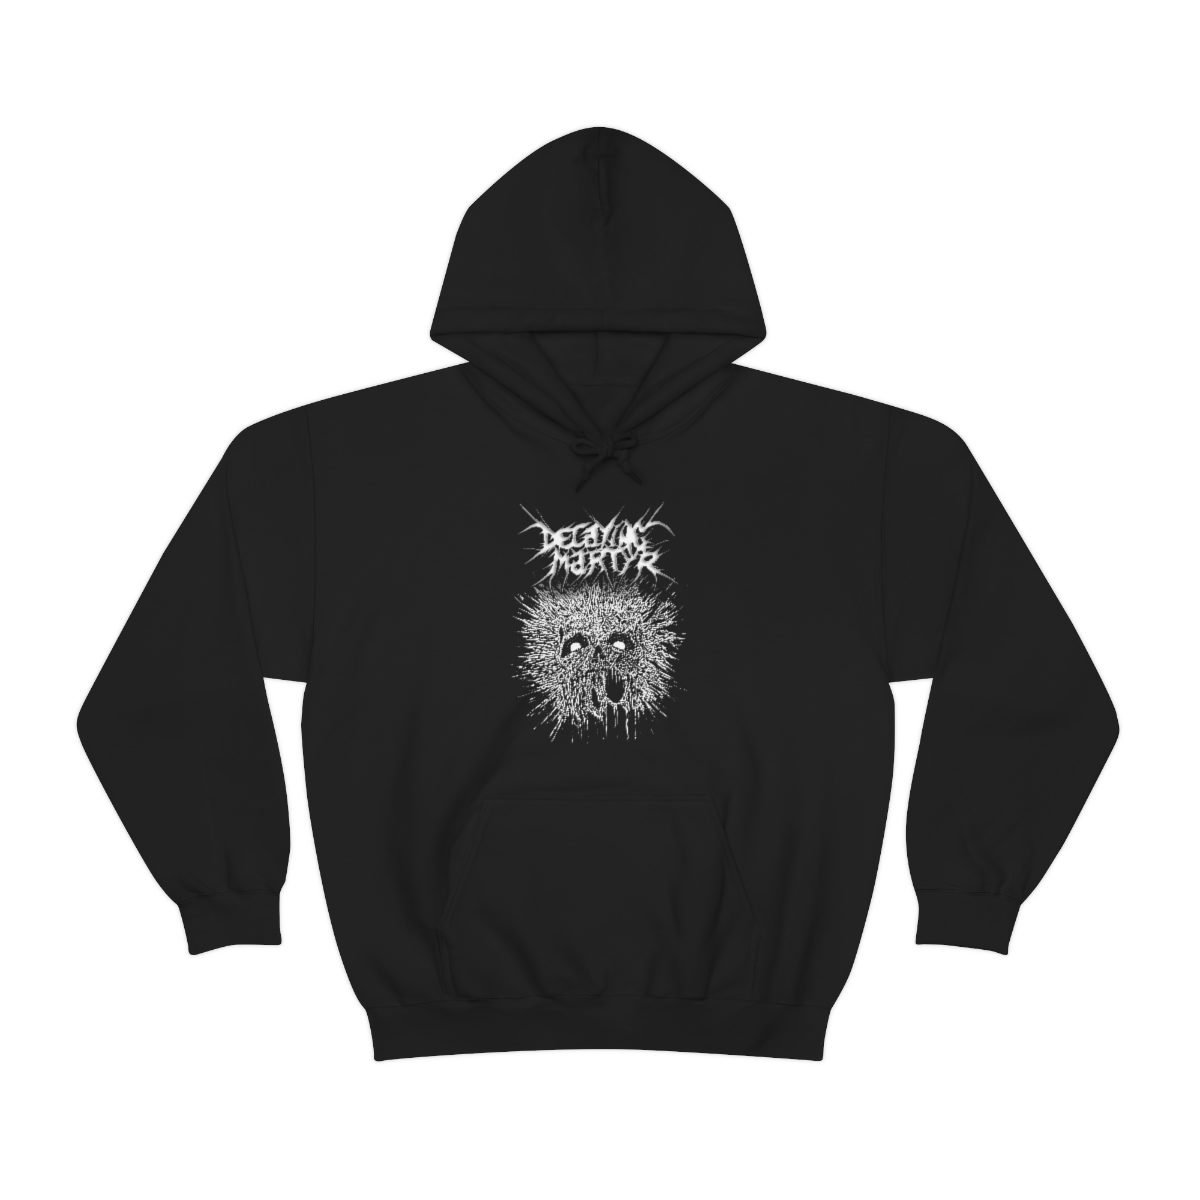 Decaying Martyr – Martyr’s Cry Pullover Hooded Sweatshirt